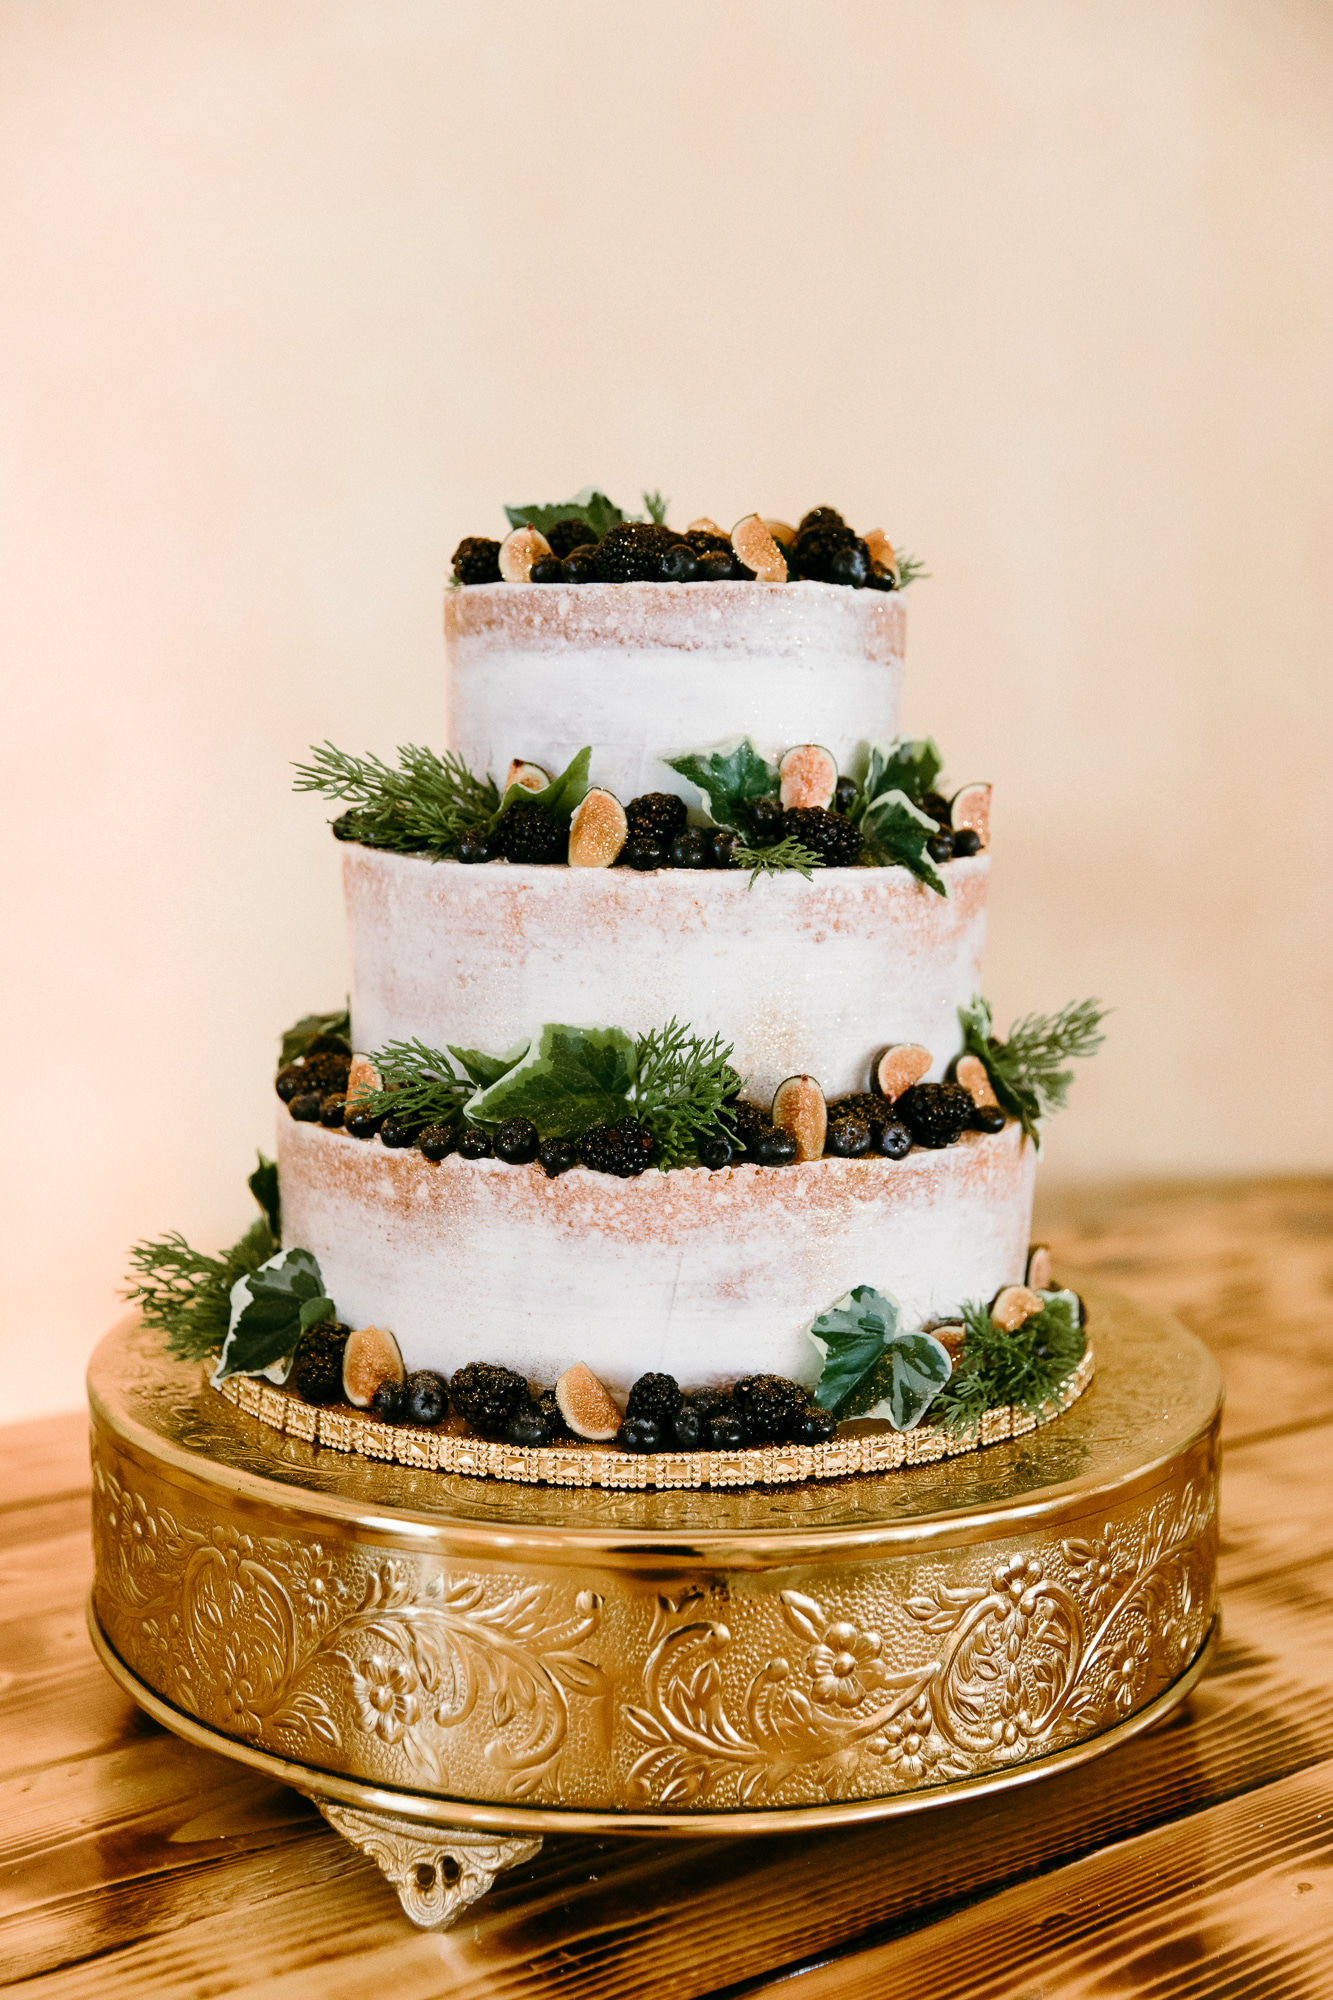 Rustic Elegant Italian Wedding Reception, Three Tier Semi Naked Wedding Cake Decorated with Greenery and Figs